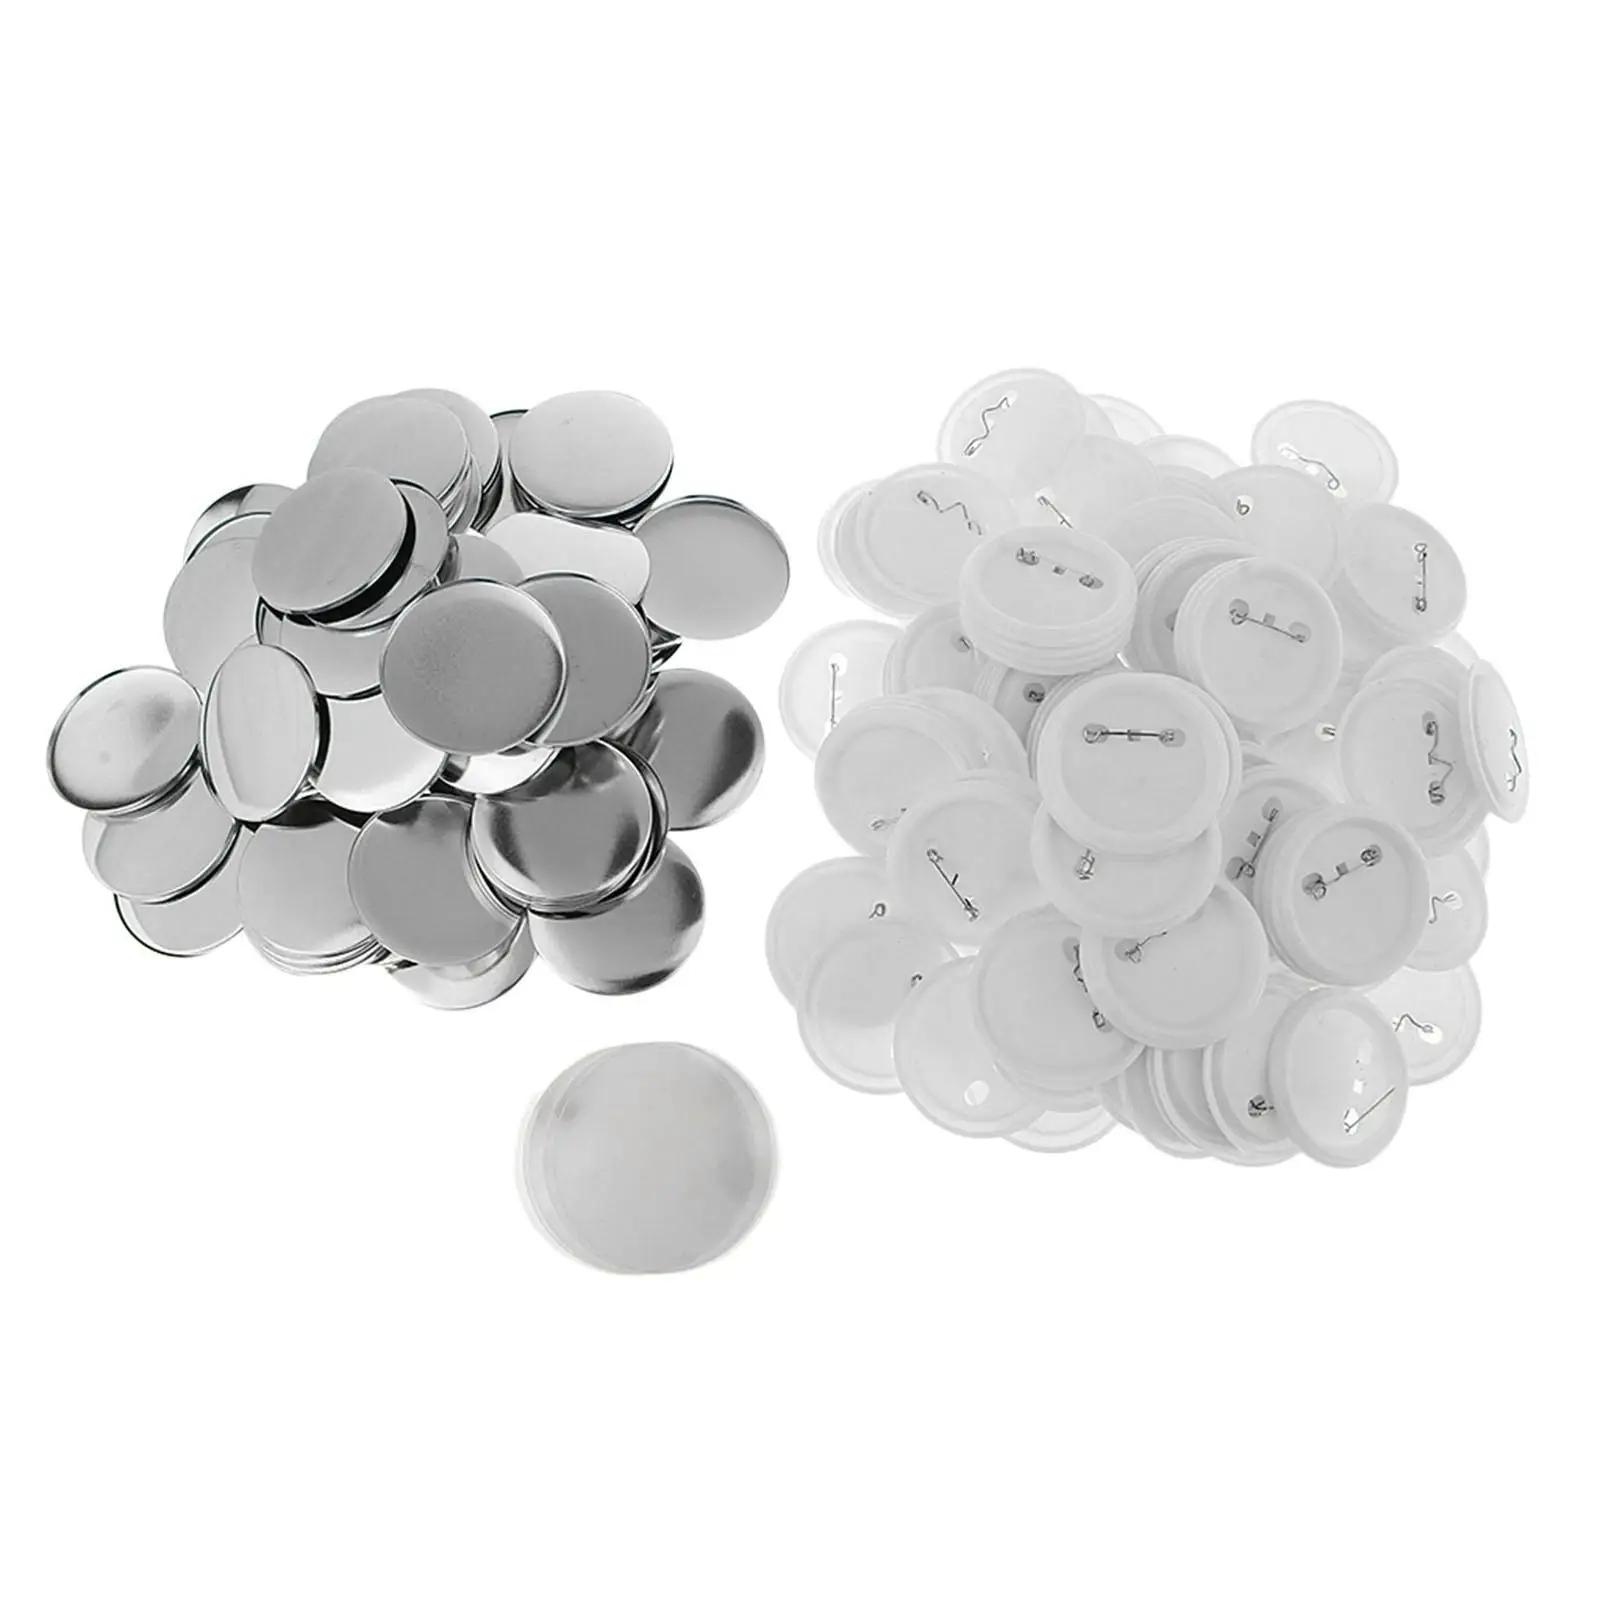 100 Sets Blank Button Making Supplies 1.97" Empty DIY Pins for Button Maker Machine Presents with Metal Cover, Base, Film